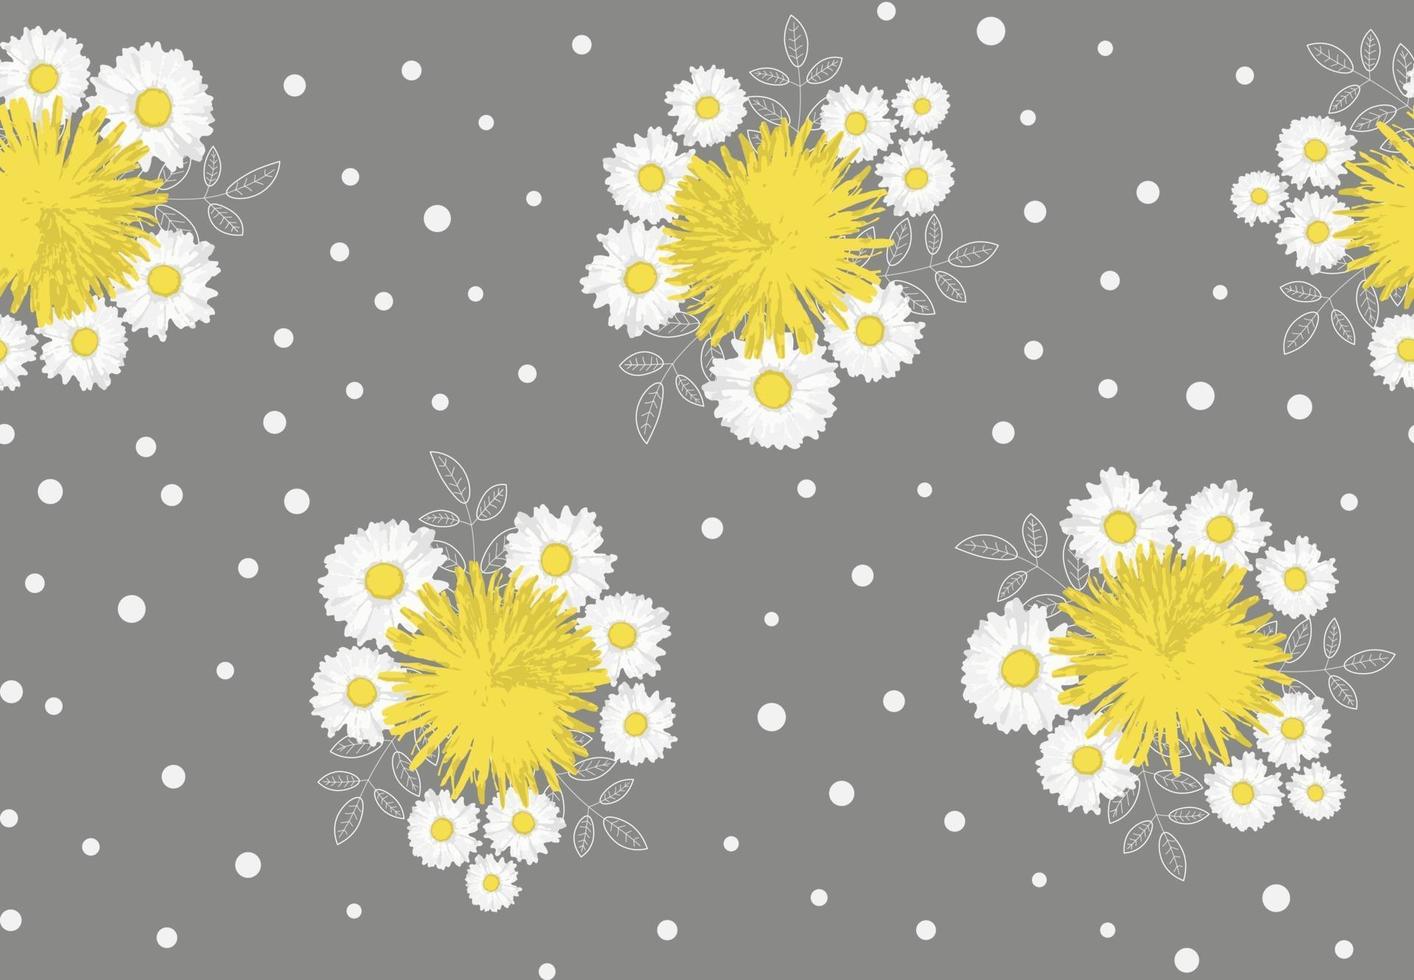 Camomile, dandelion and leaves seamless pattern on grey background. Vector illustration.